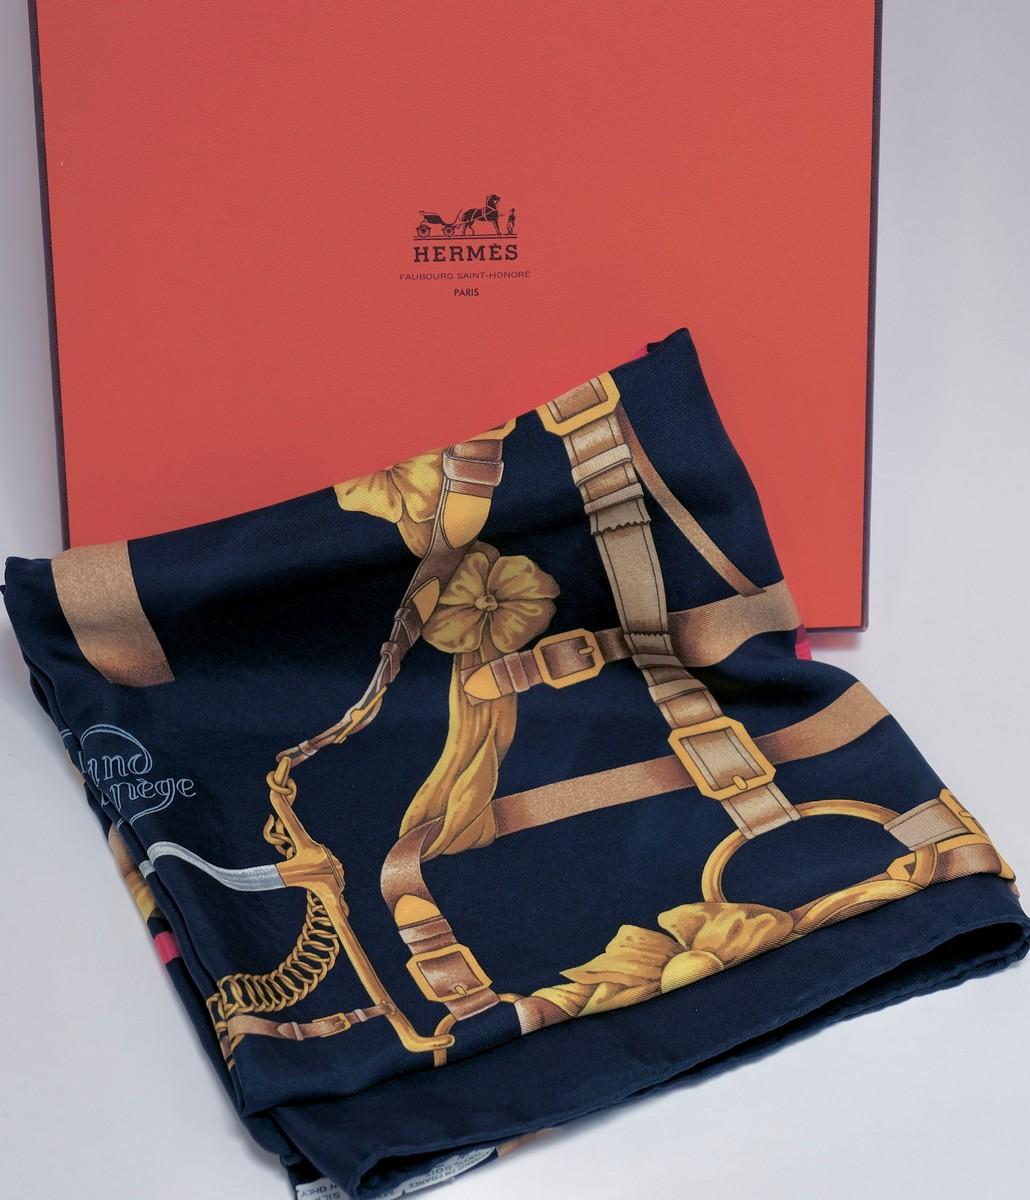 HERMES SCARF | OLD TOWN HALL AUCTION: LUXURY ITEMS, ARTWORK, STERLING ...